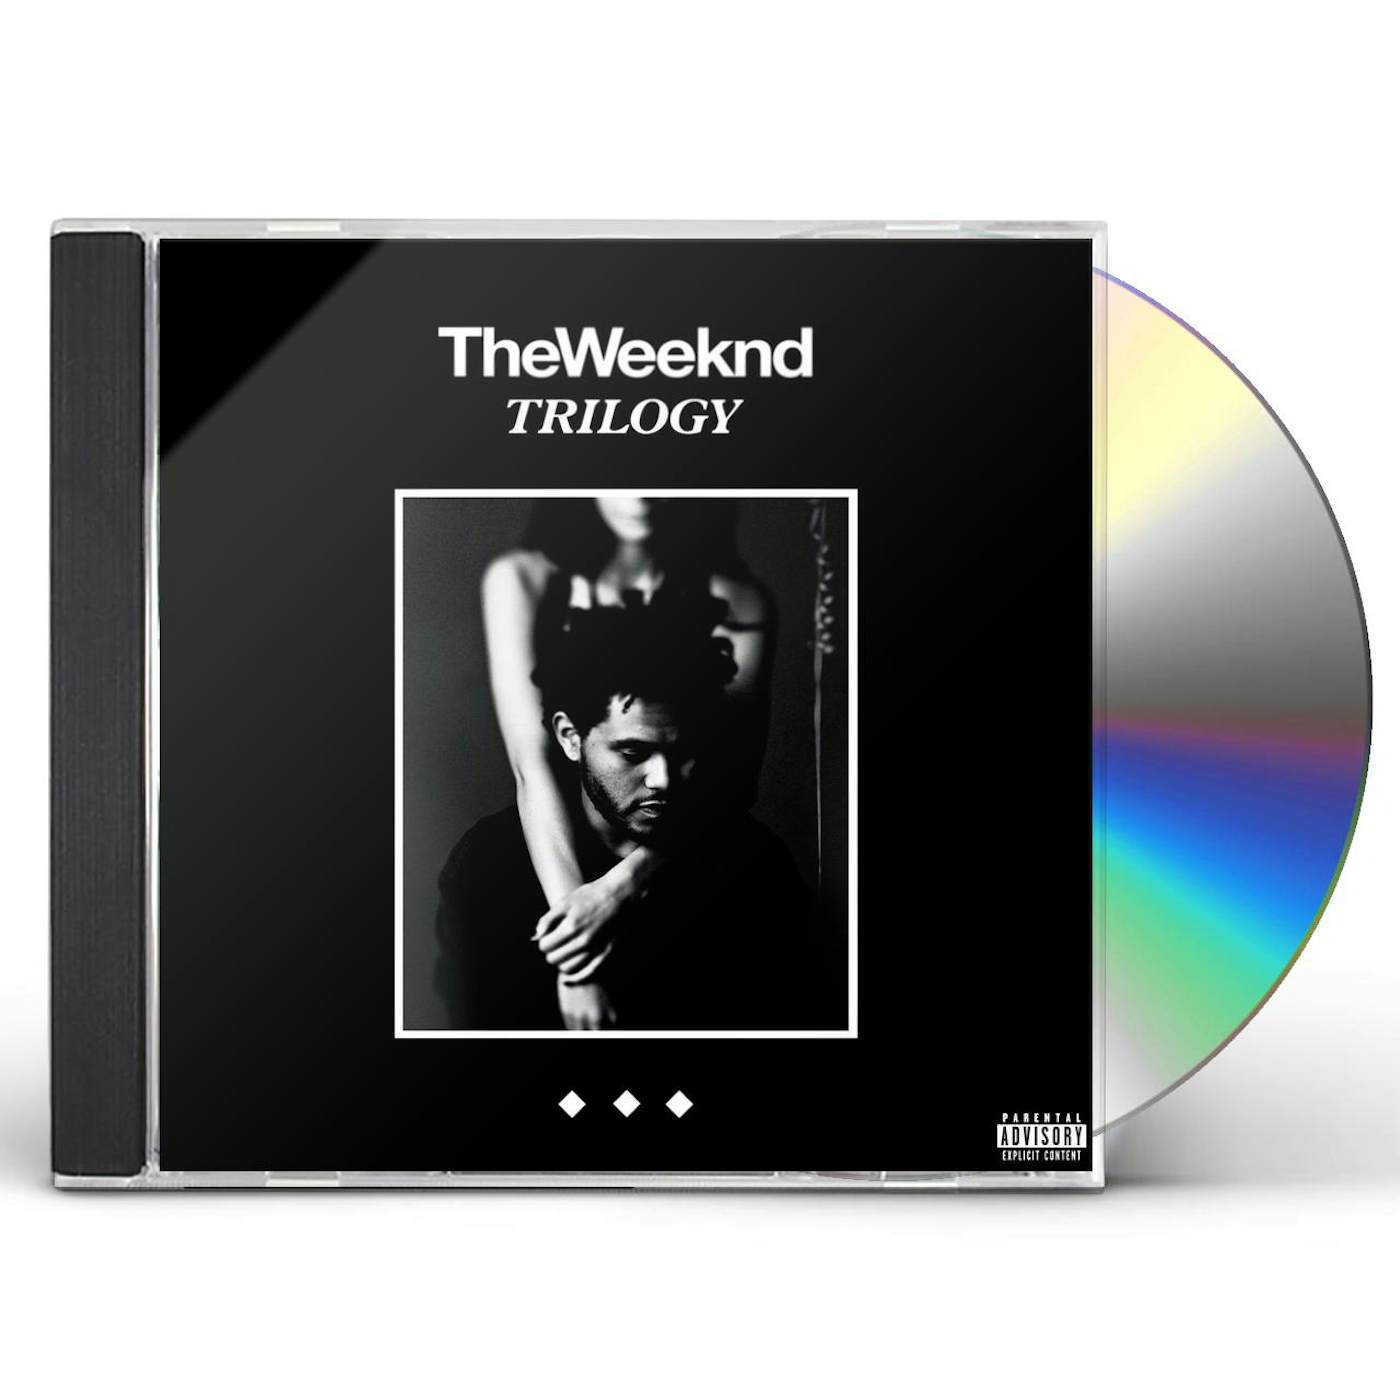 The Weeknd TRILOGY CD